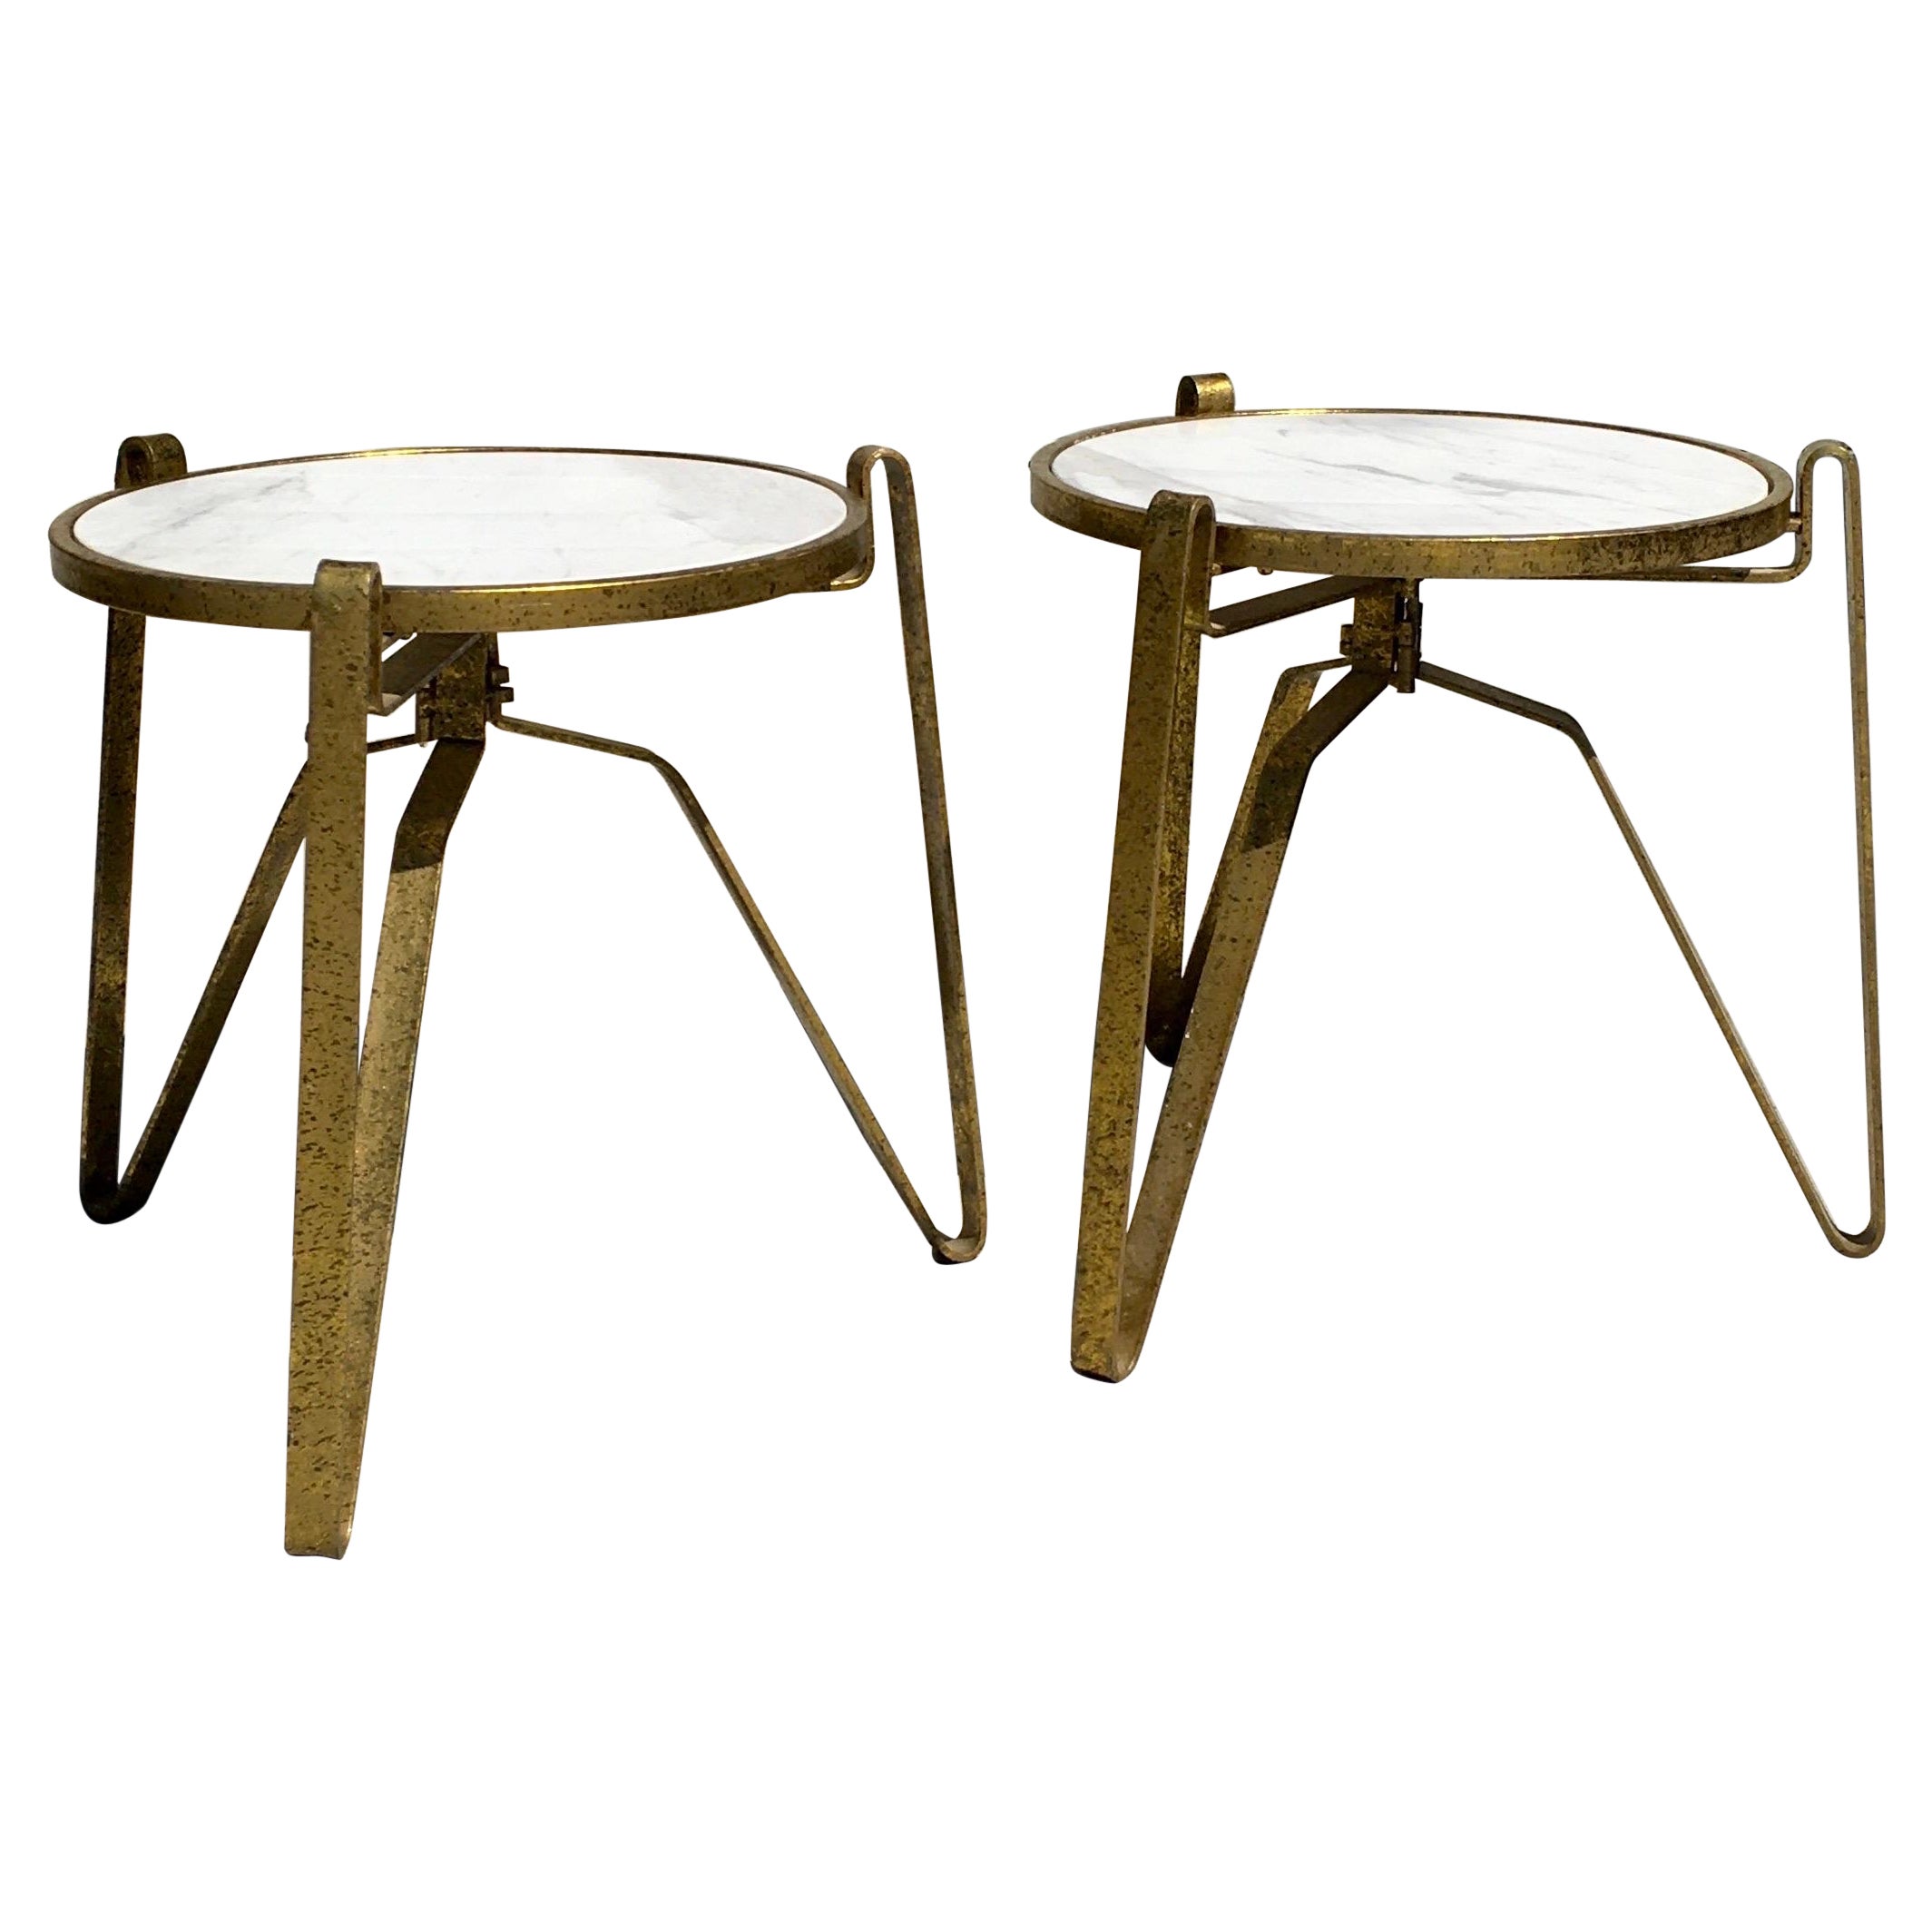 Pair of Italian Modernist Style Marble and Gold Leaf Metal Side Tables